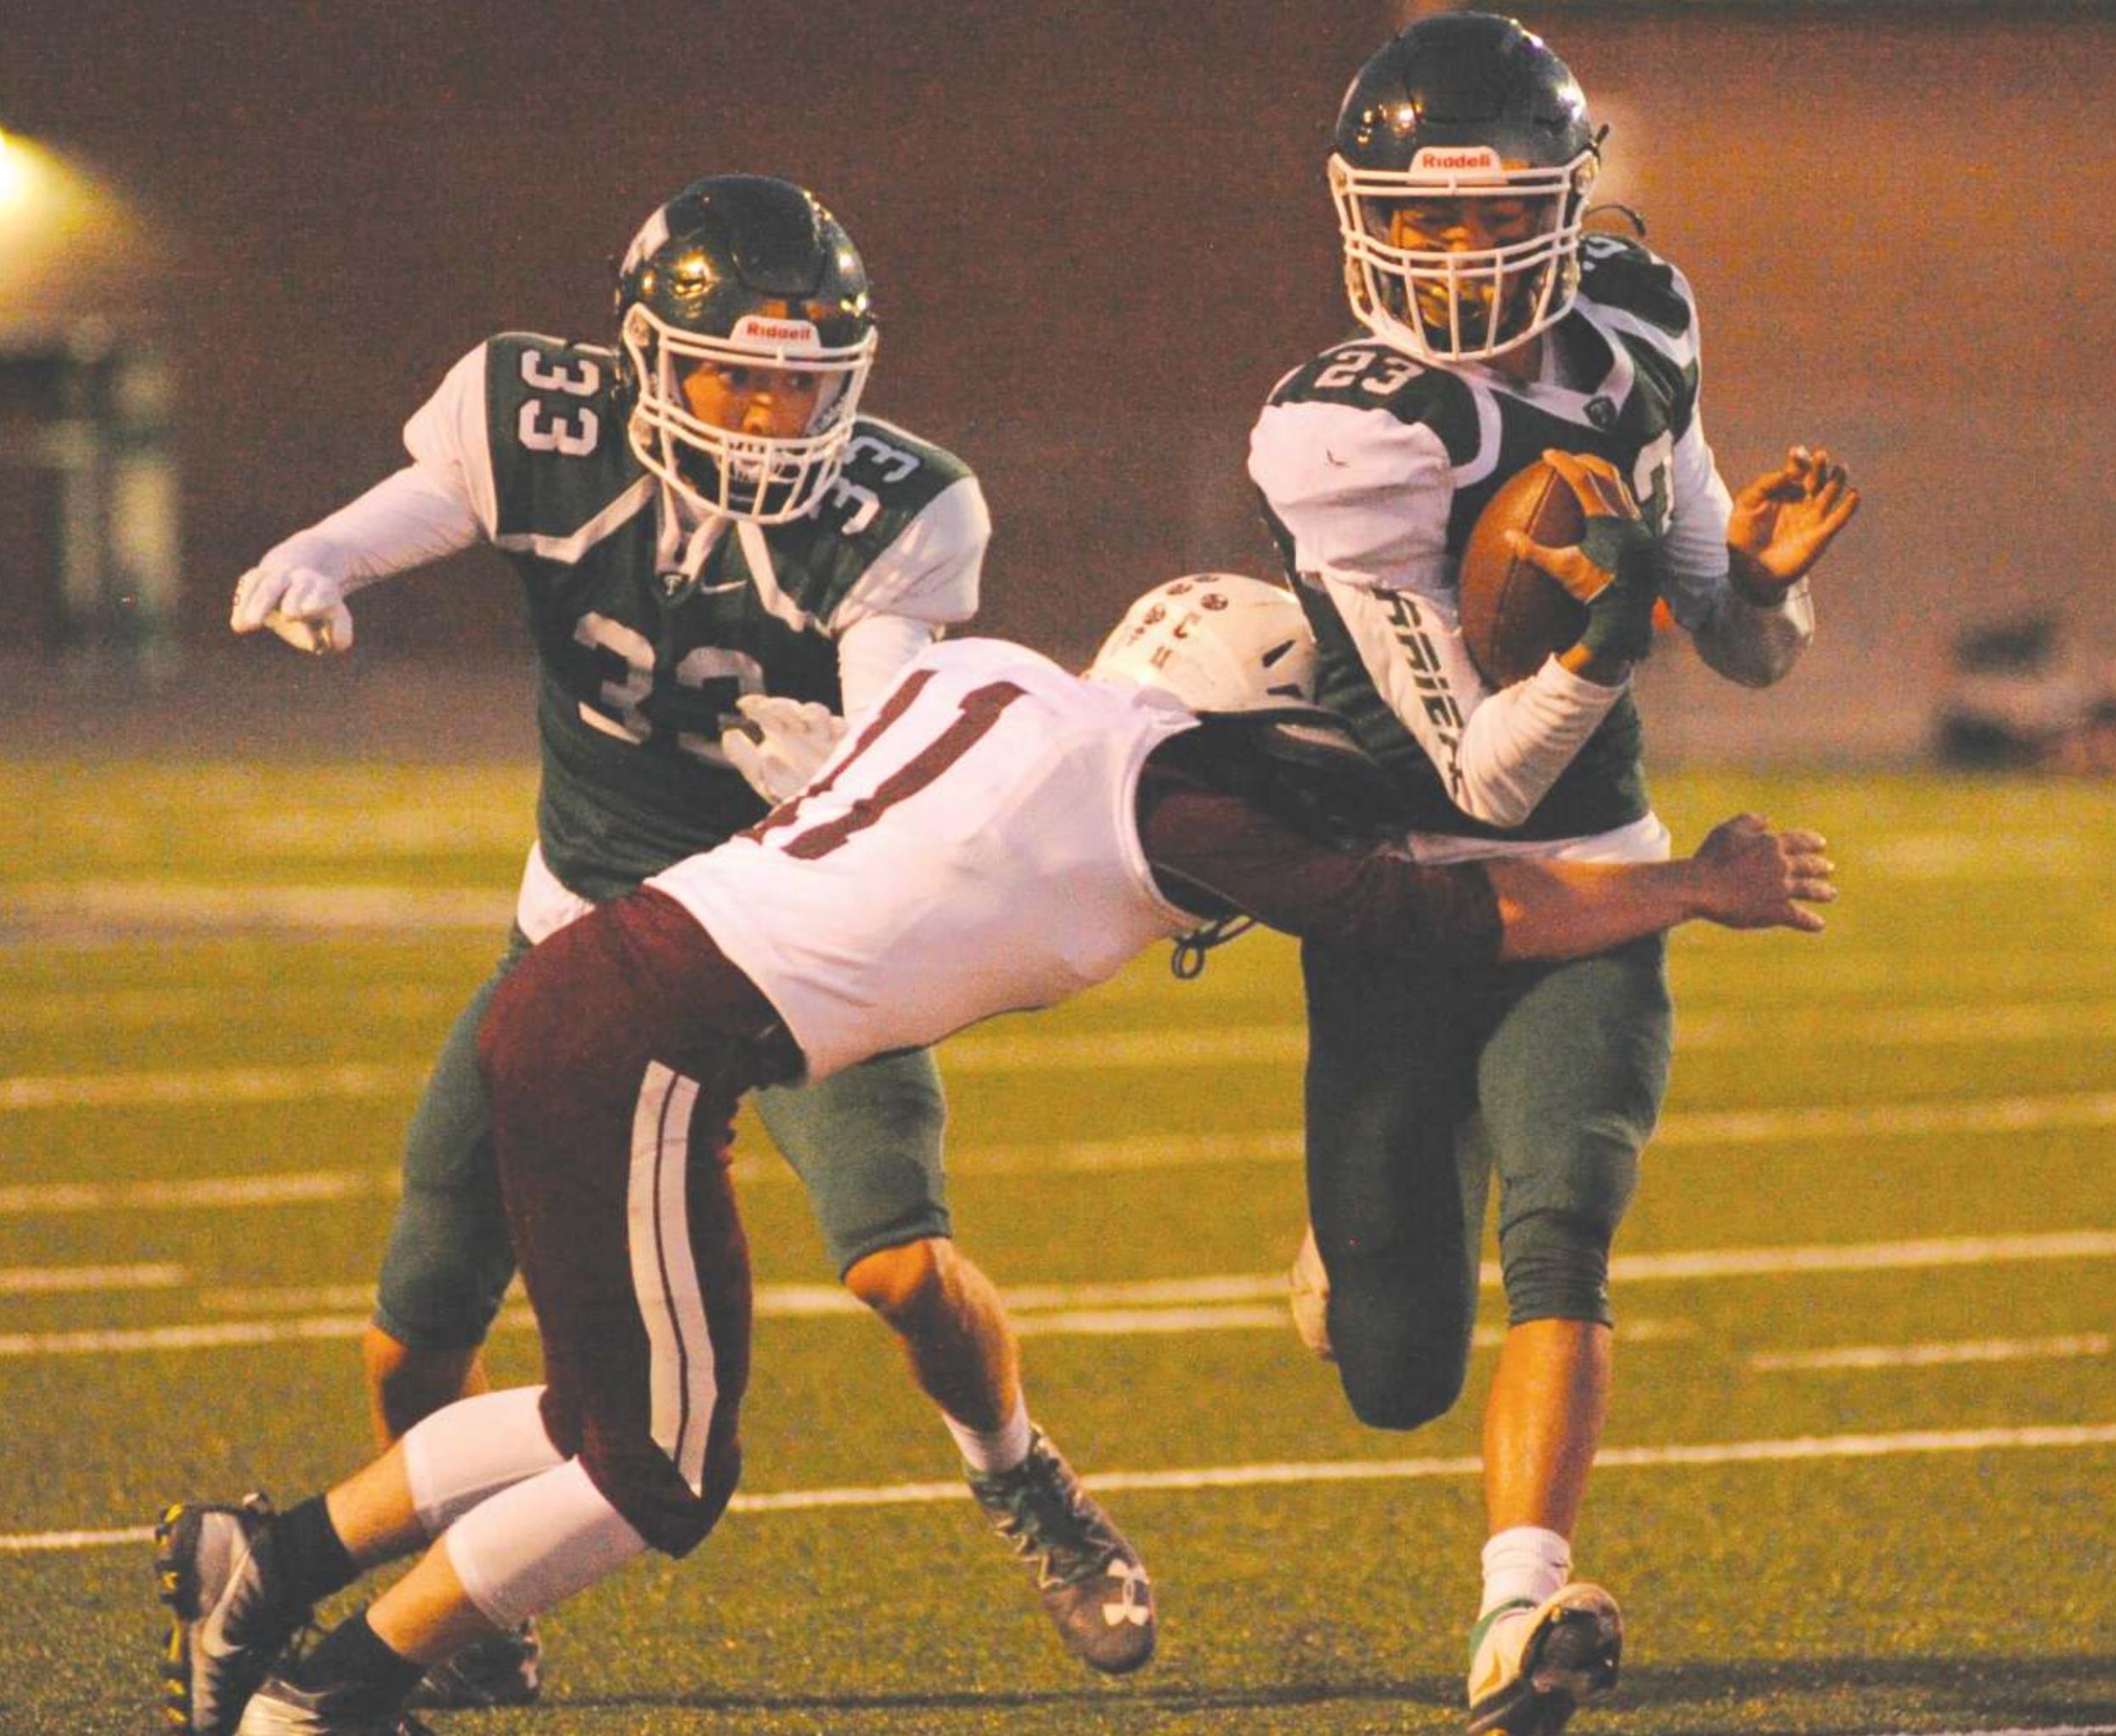 Ethan Hamberlin breaks a tackle during Thomas’ game against Sayre, which the Terriers won 28-6. Aubyn Phippen/WDN